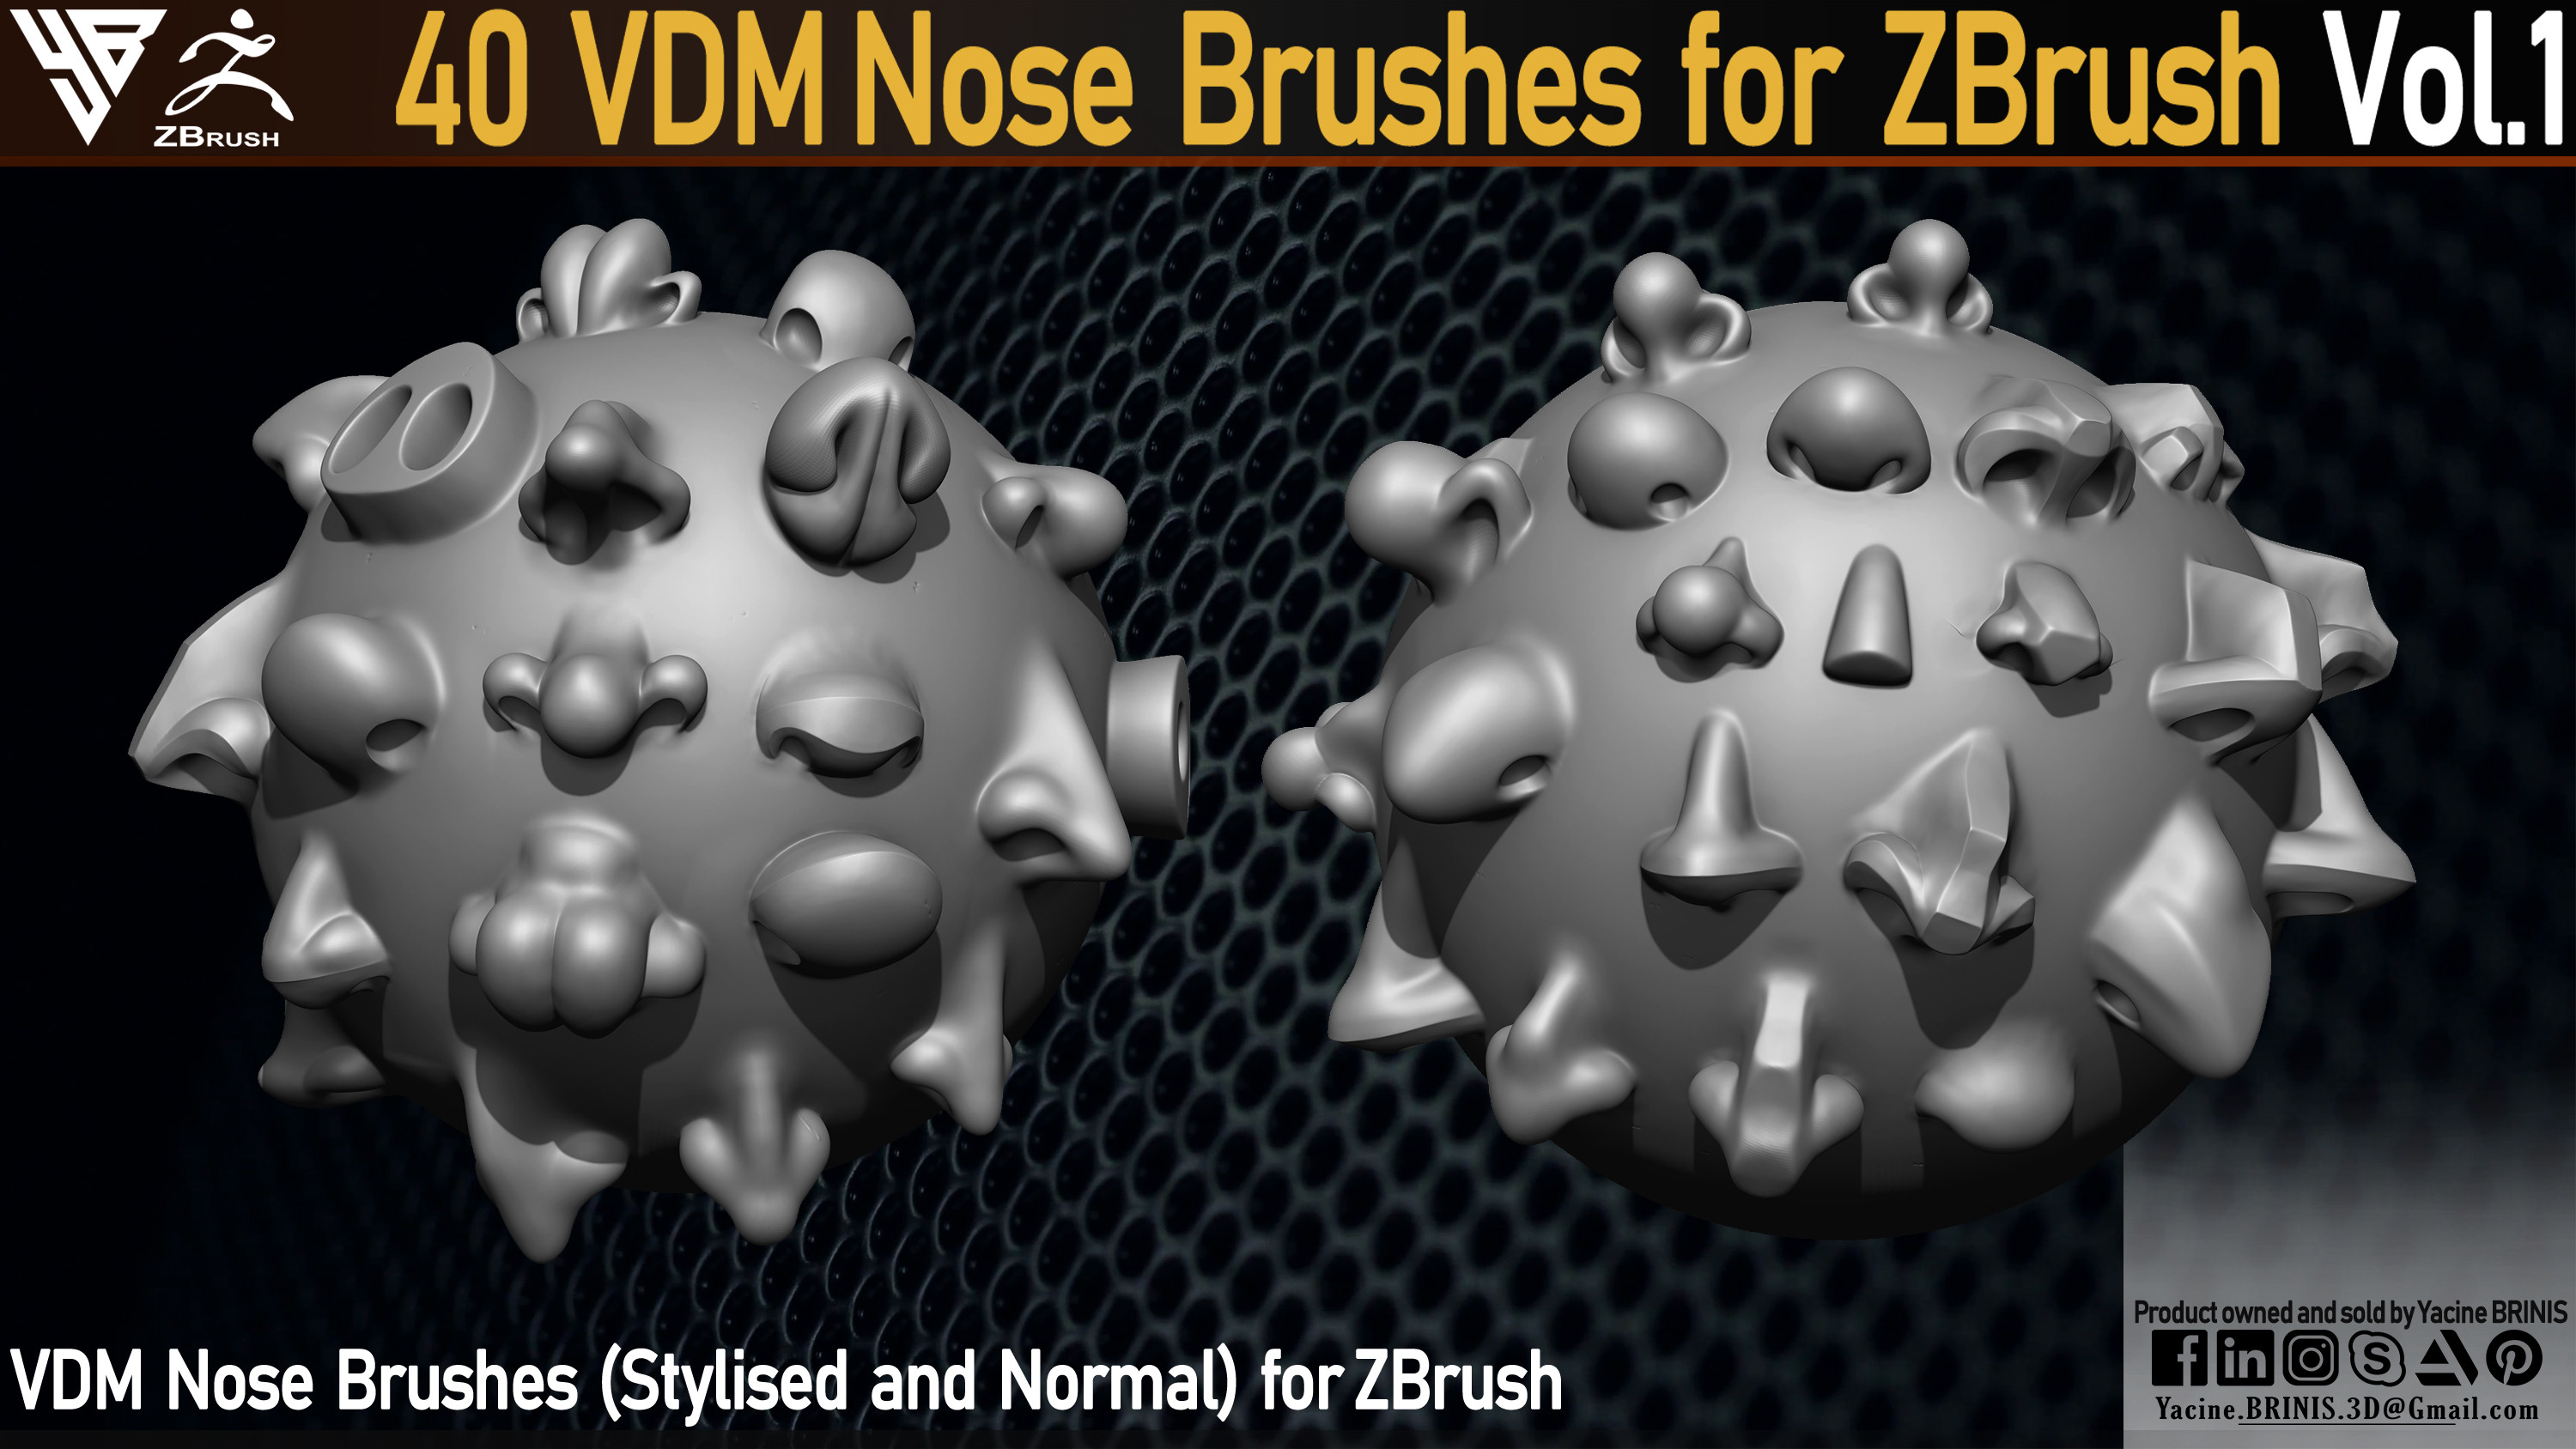 40 VDM Nose Brushes for ZBrush Vol 01 (Stylised and Normal) by Yacine BRINIS Set 05